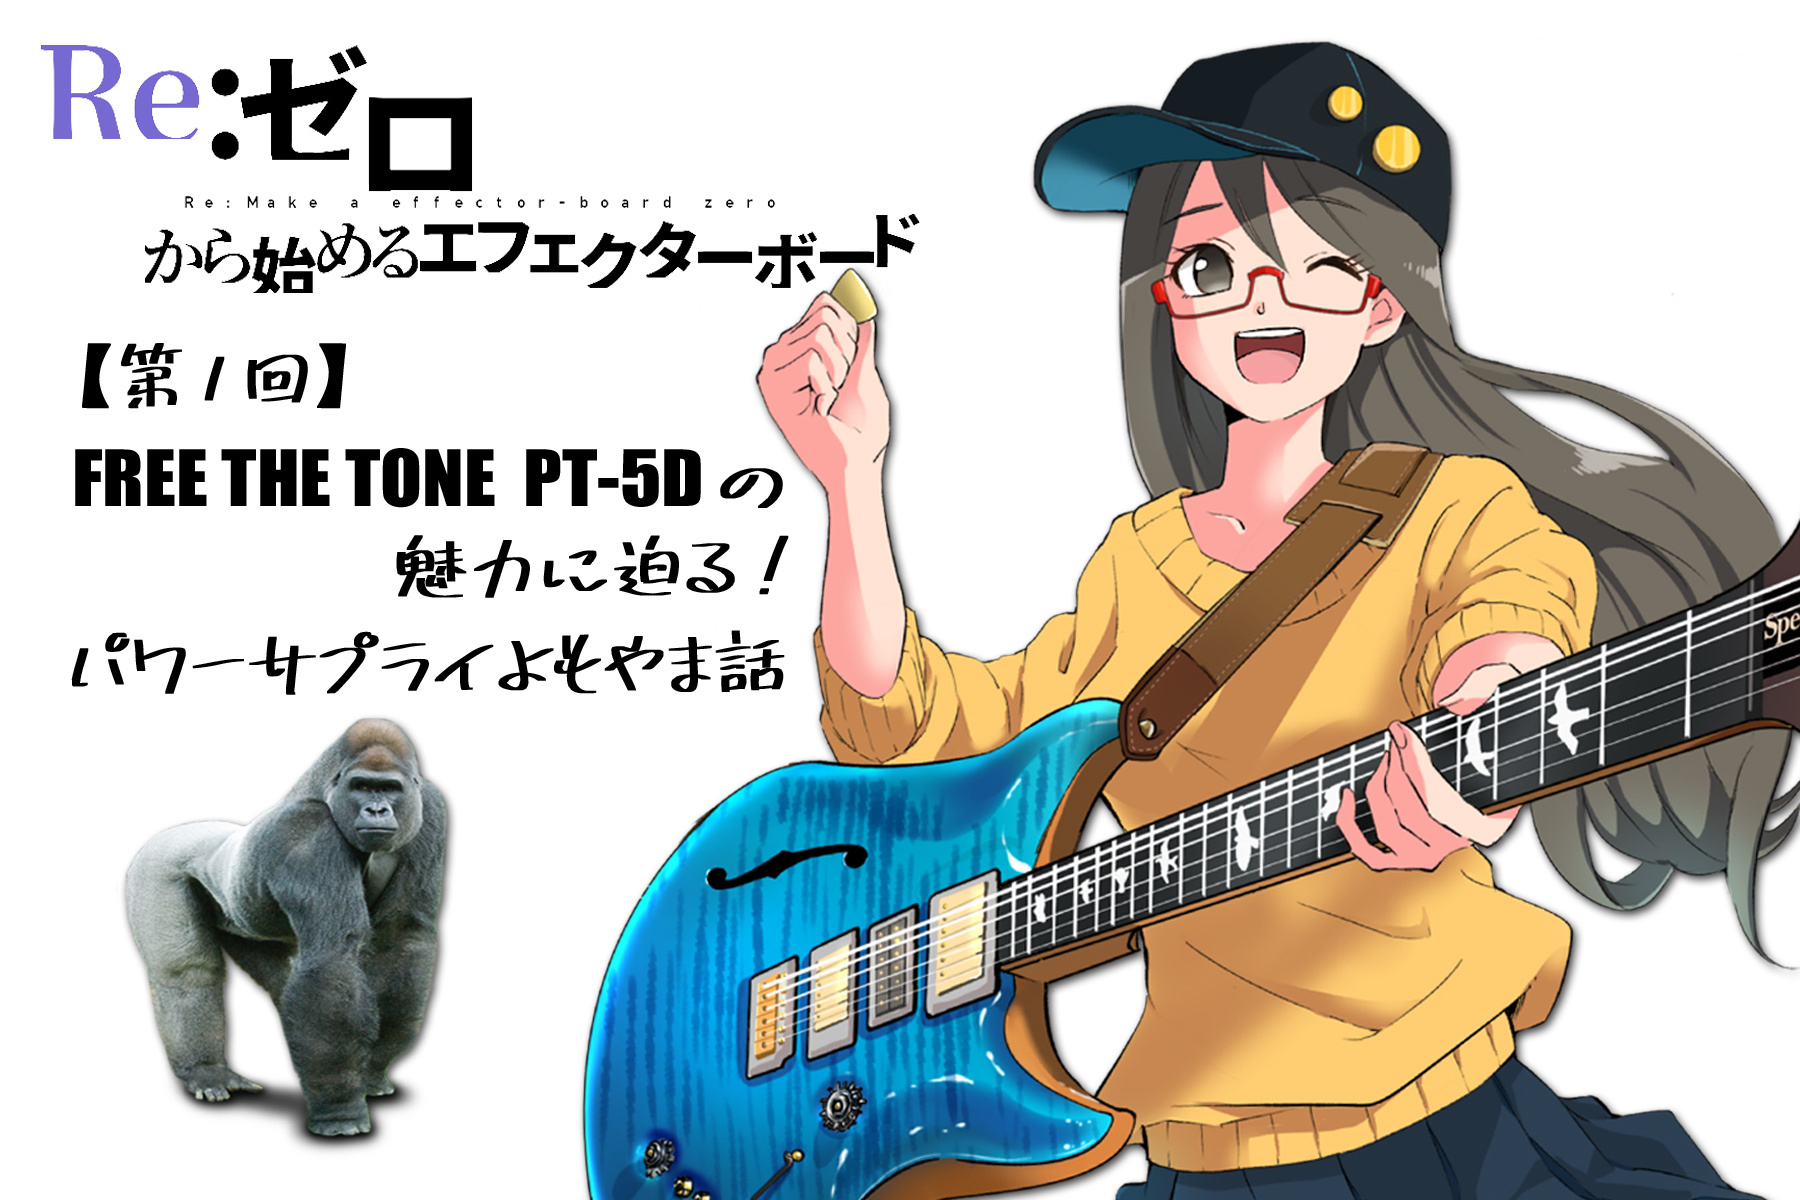 Re：ゼロから始めるエフェクターボード【第１回】FREE THE TONE PT-5D